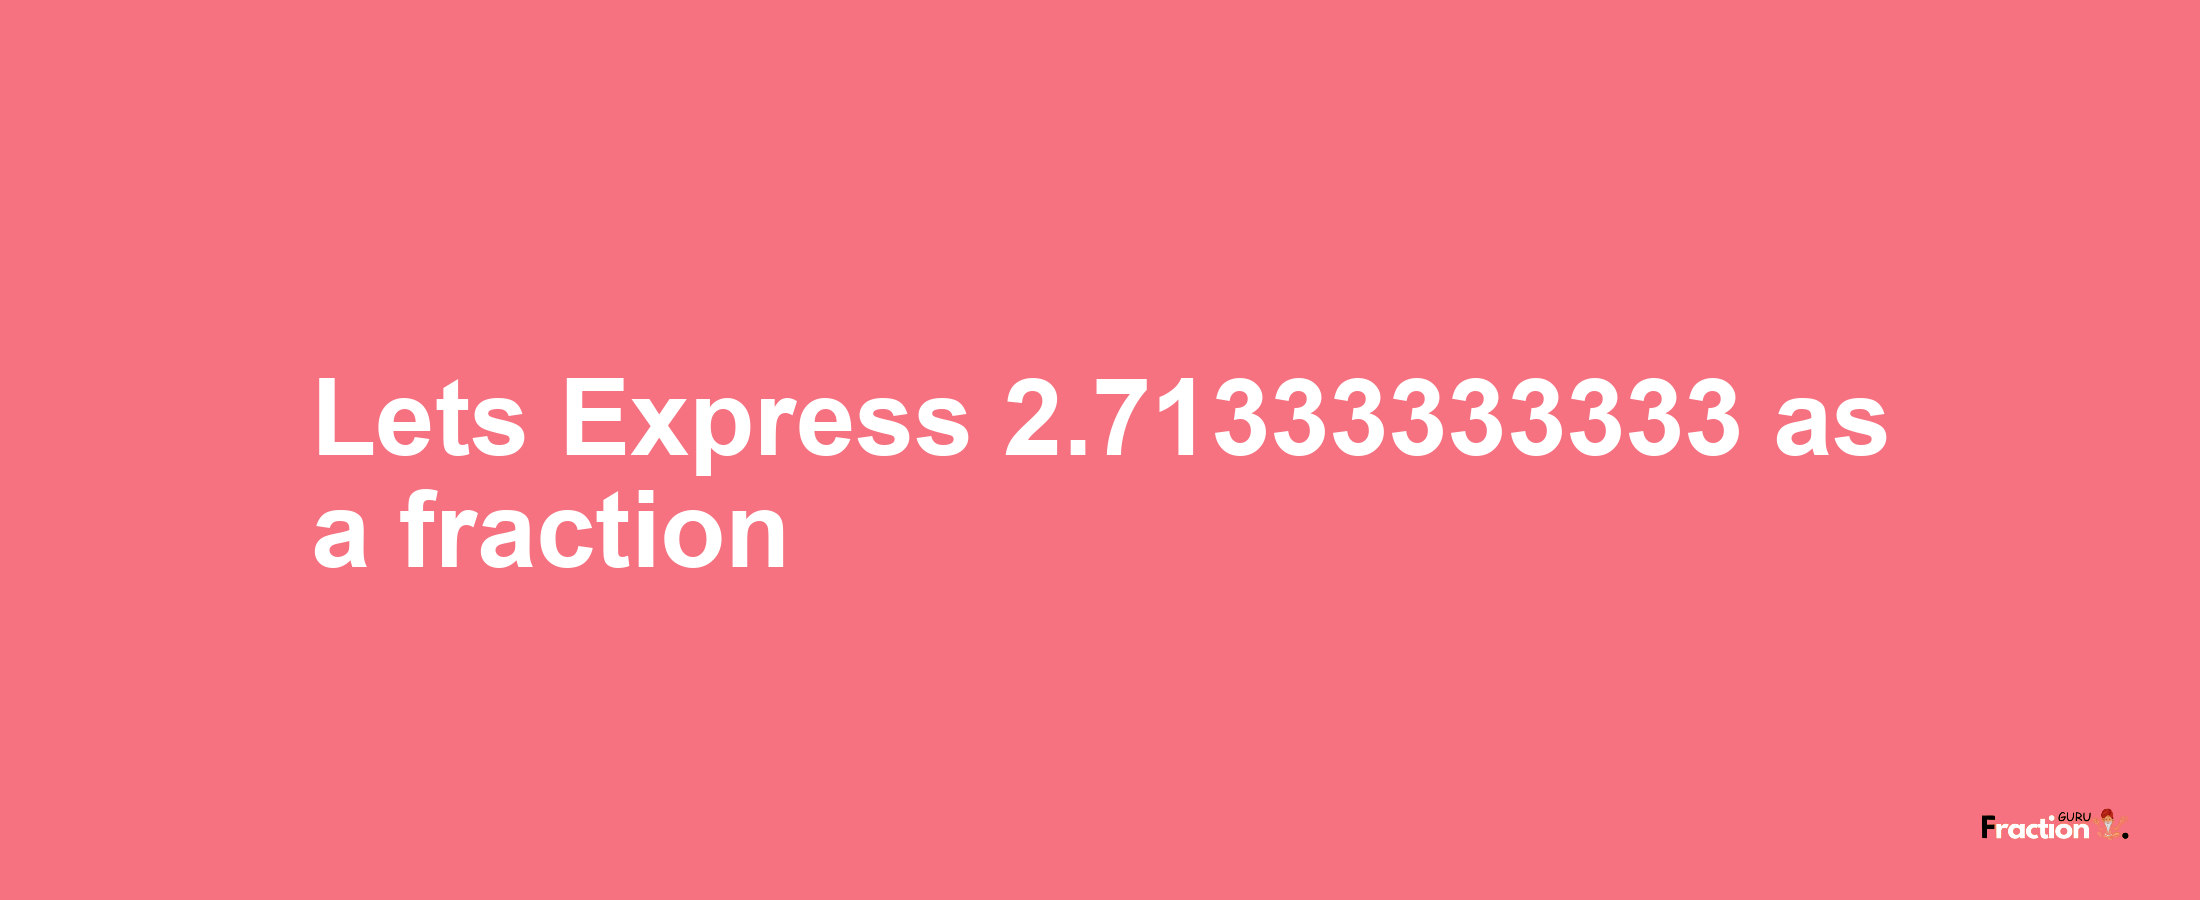 Lets Express 2.71333333333 as afraction